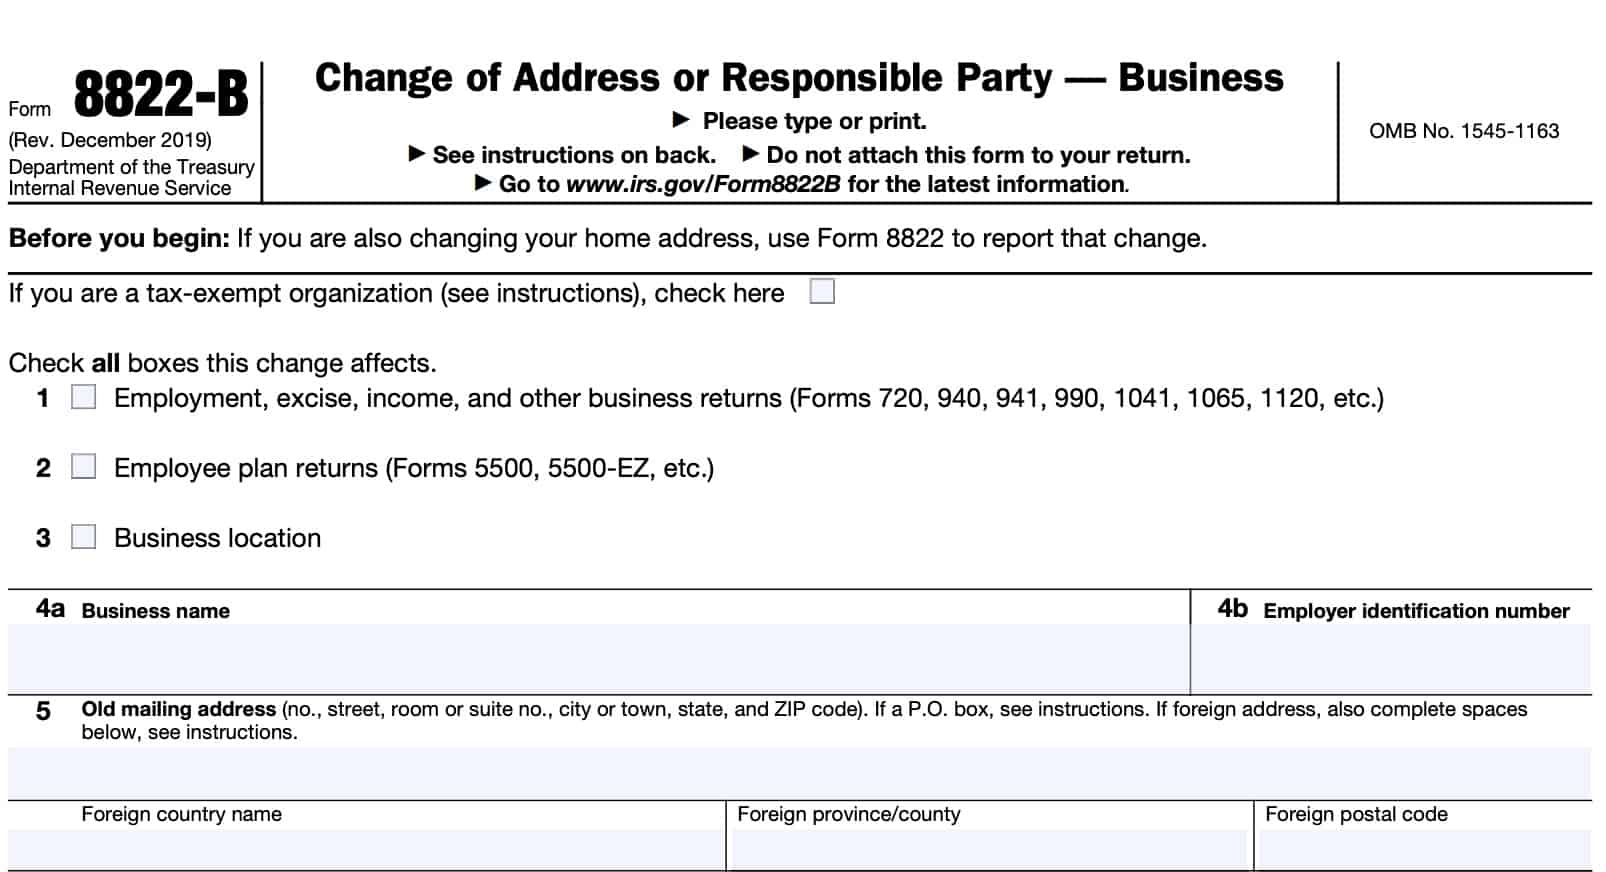 irs form 8822-b, change of address or responsible party - business, top